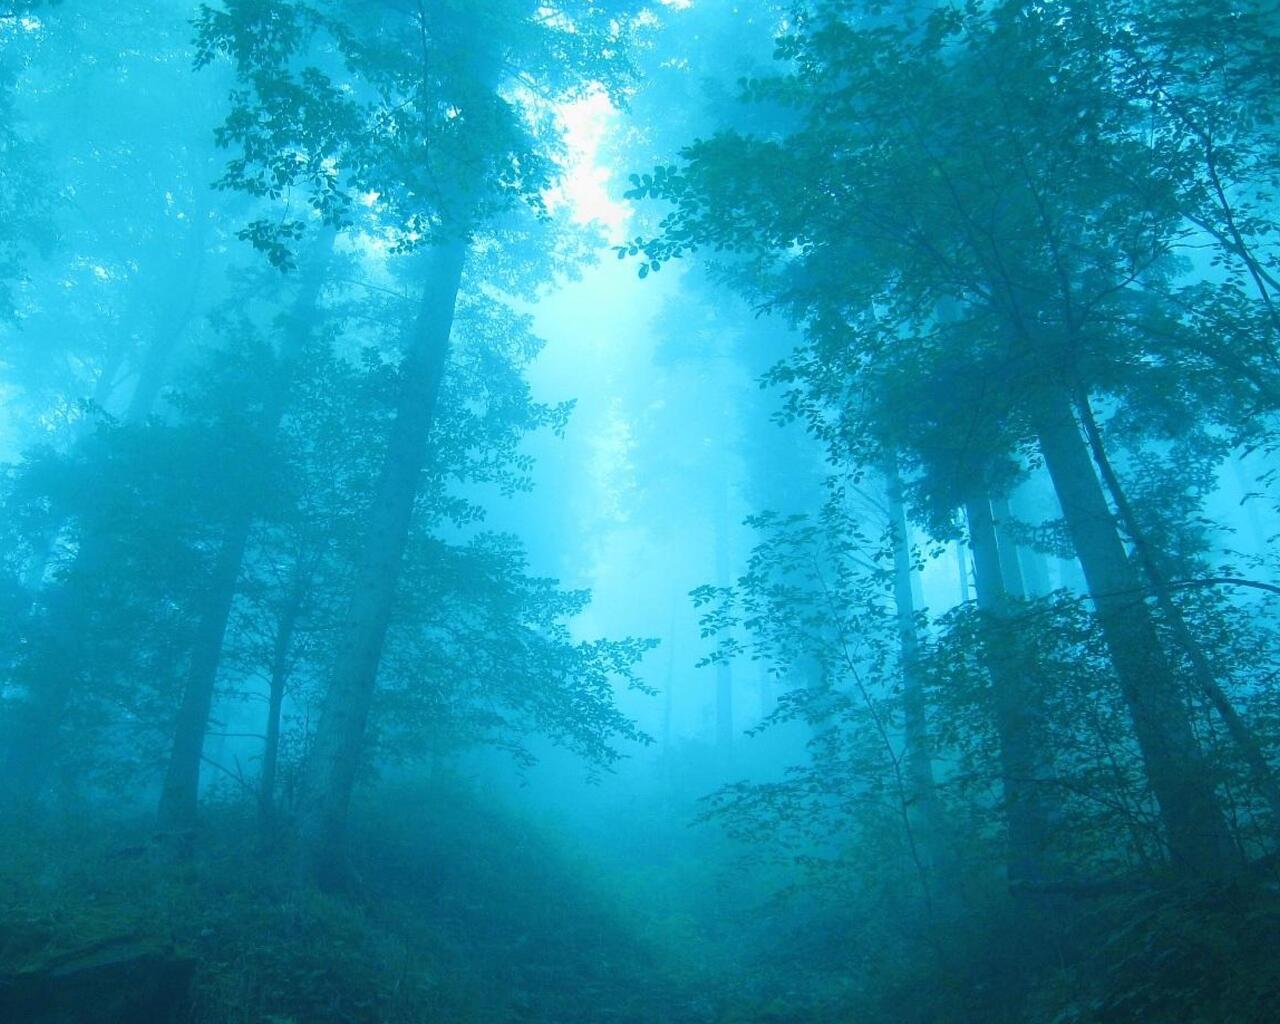 A blue forest with trees and fog - Foggy forest